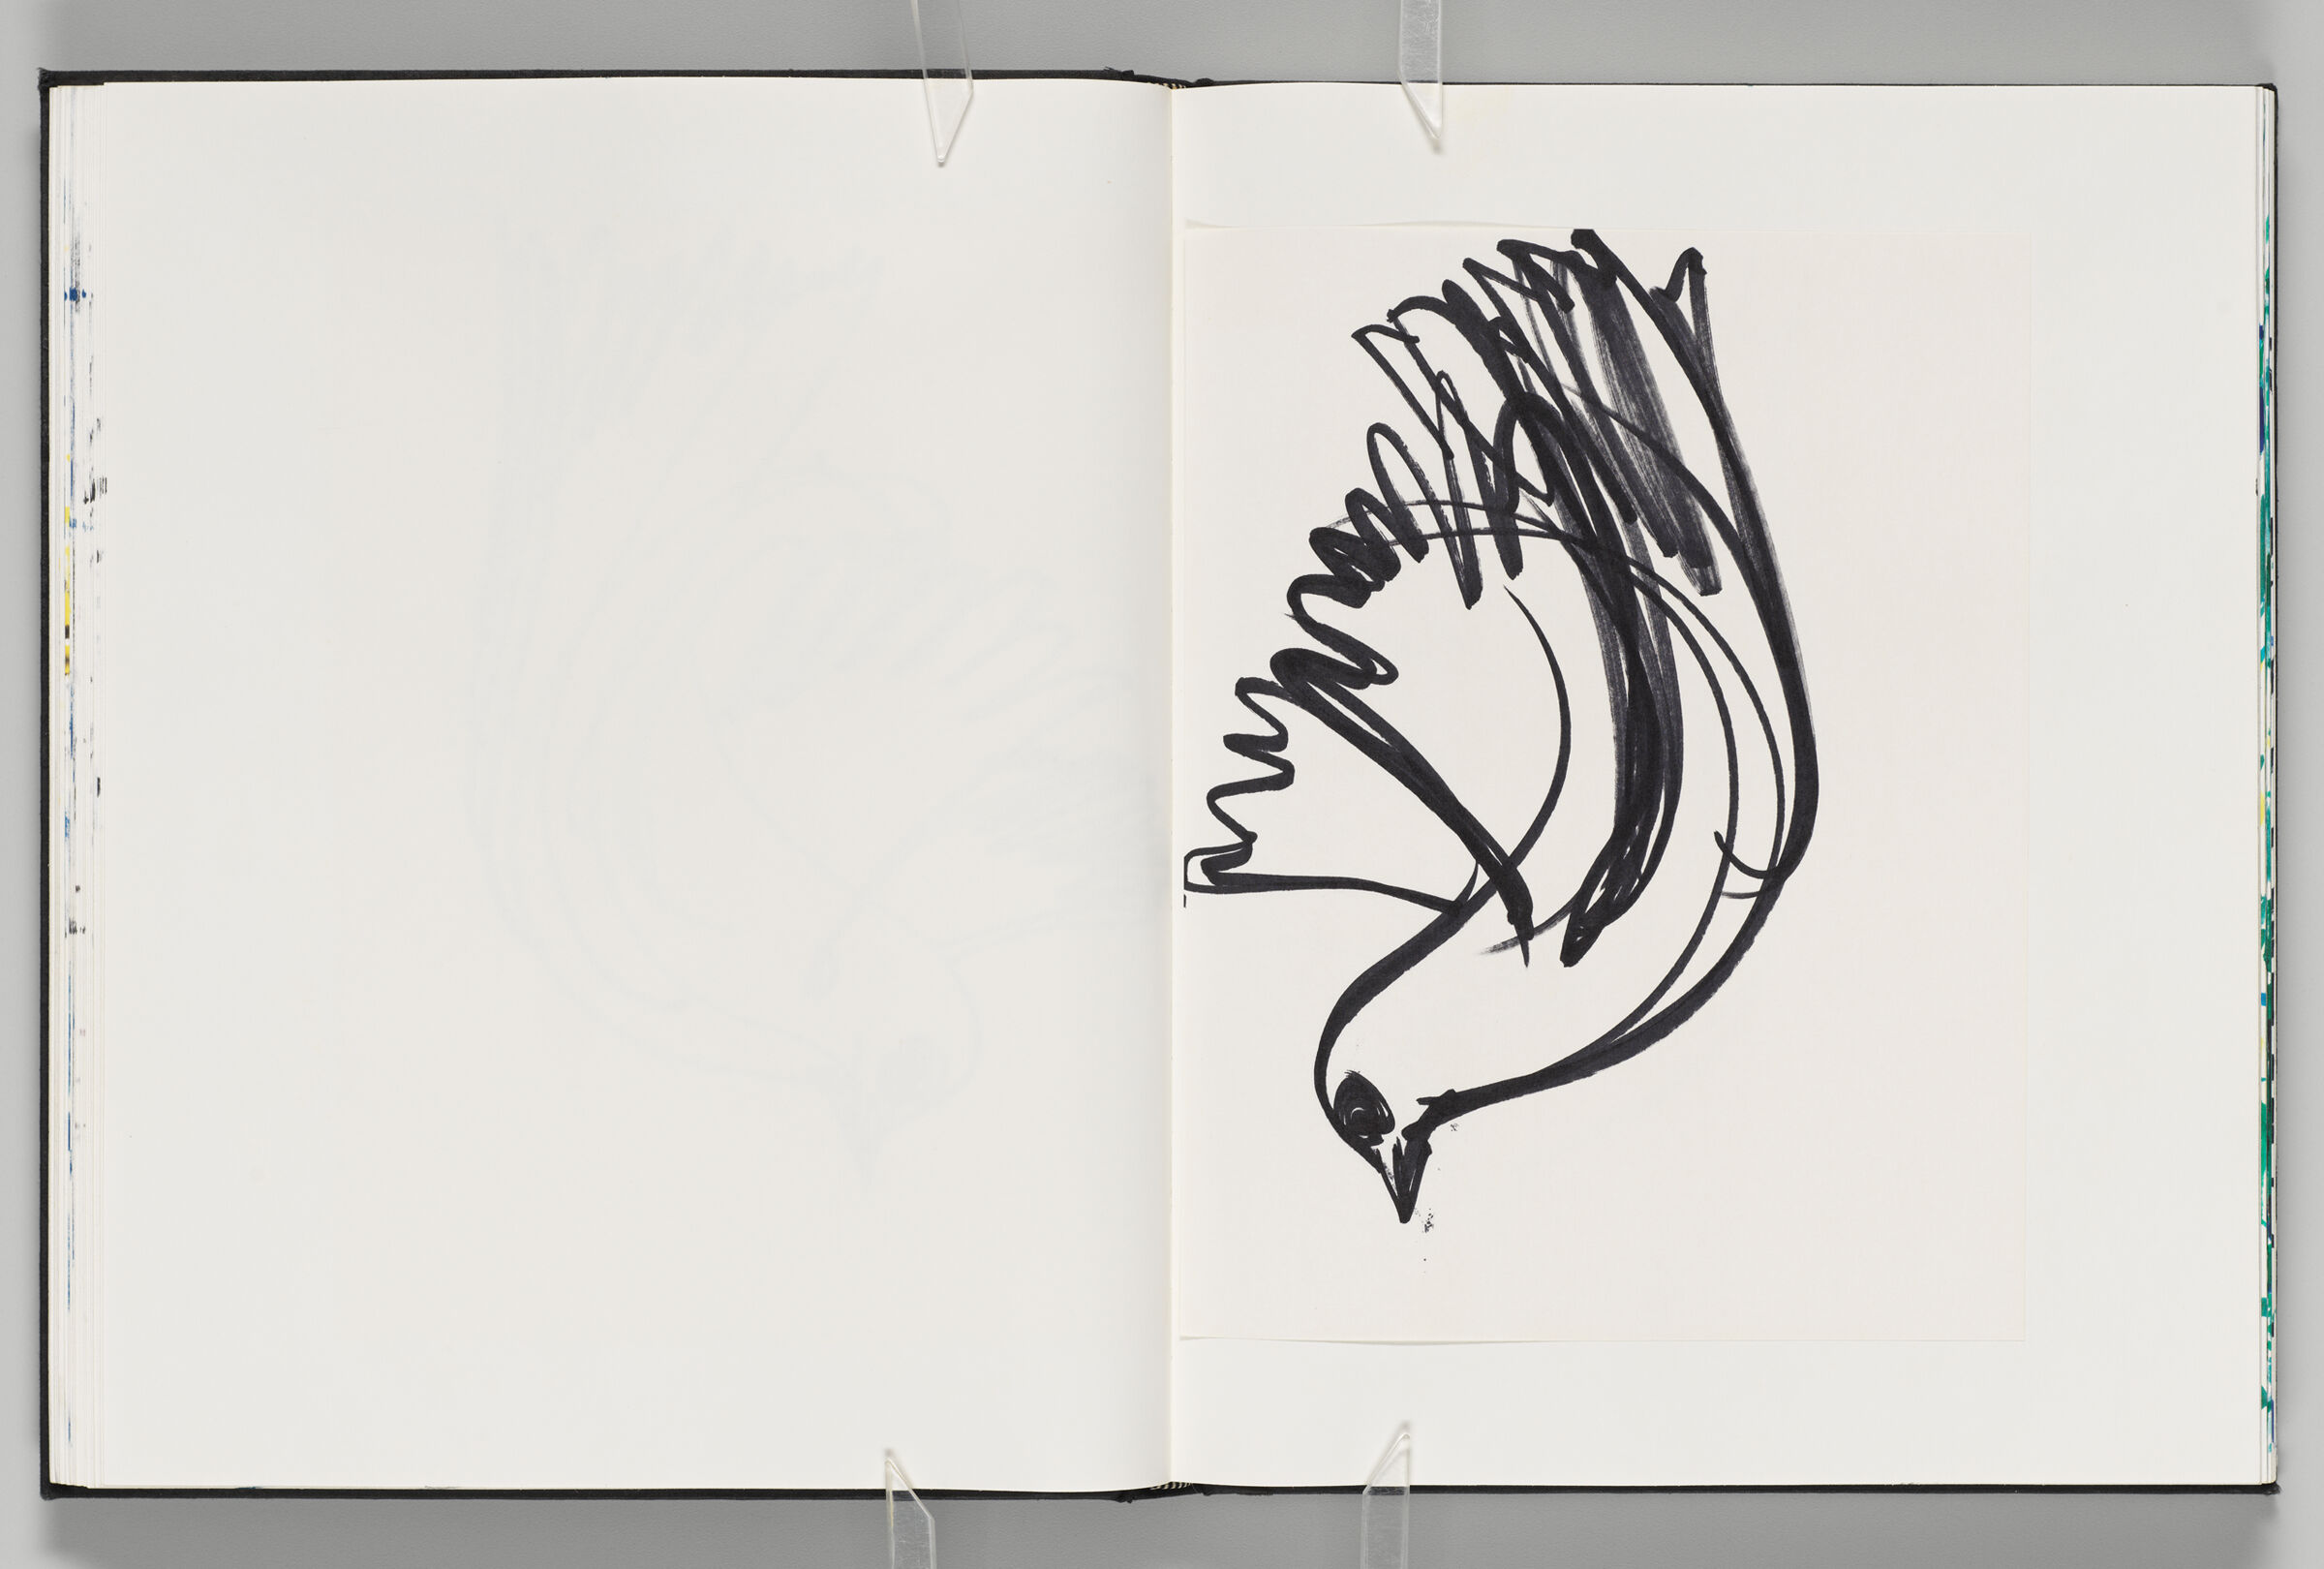 Untitled (Blank, Left Page); Untitled (Dove On Adhered Sheet, Right Page)